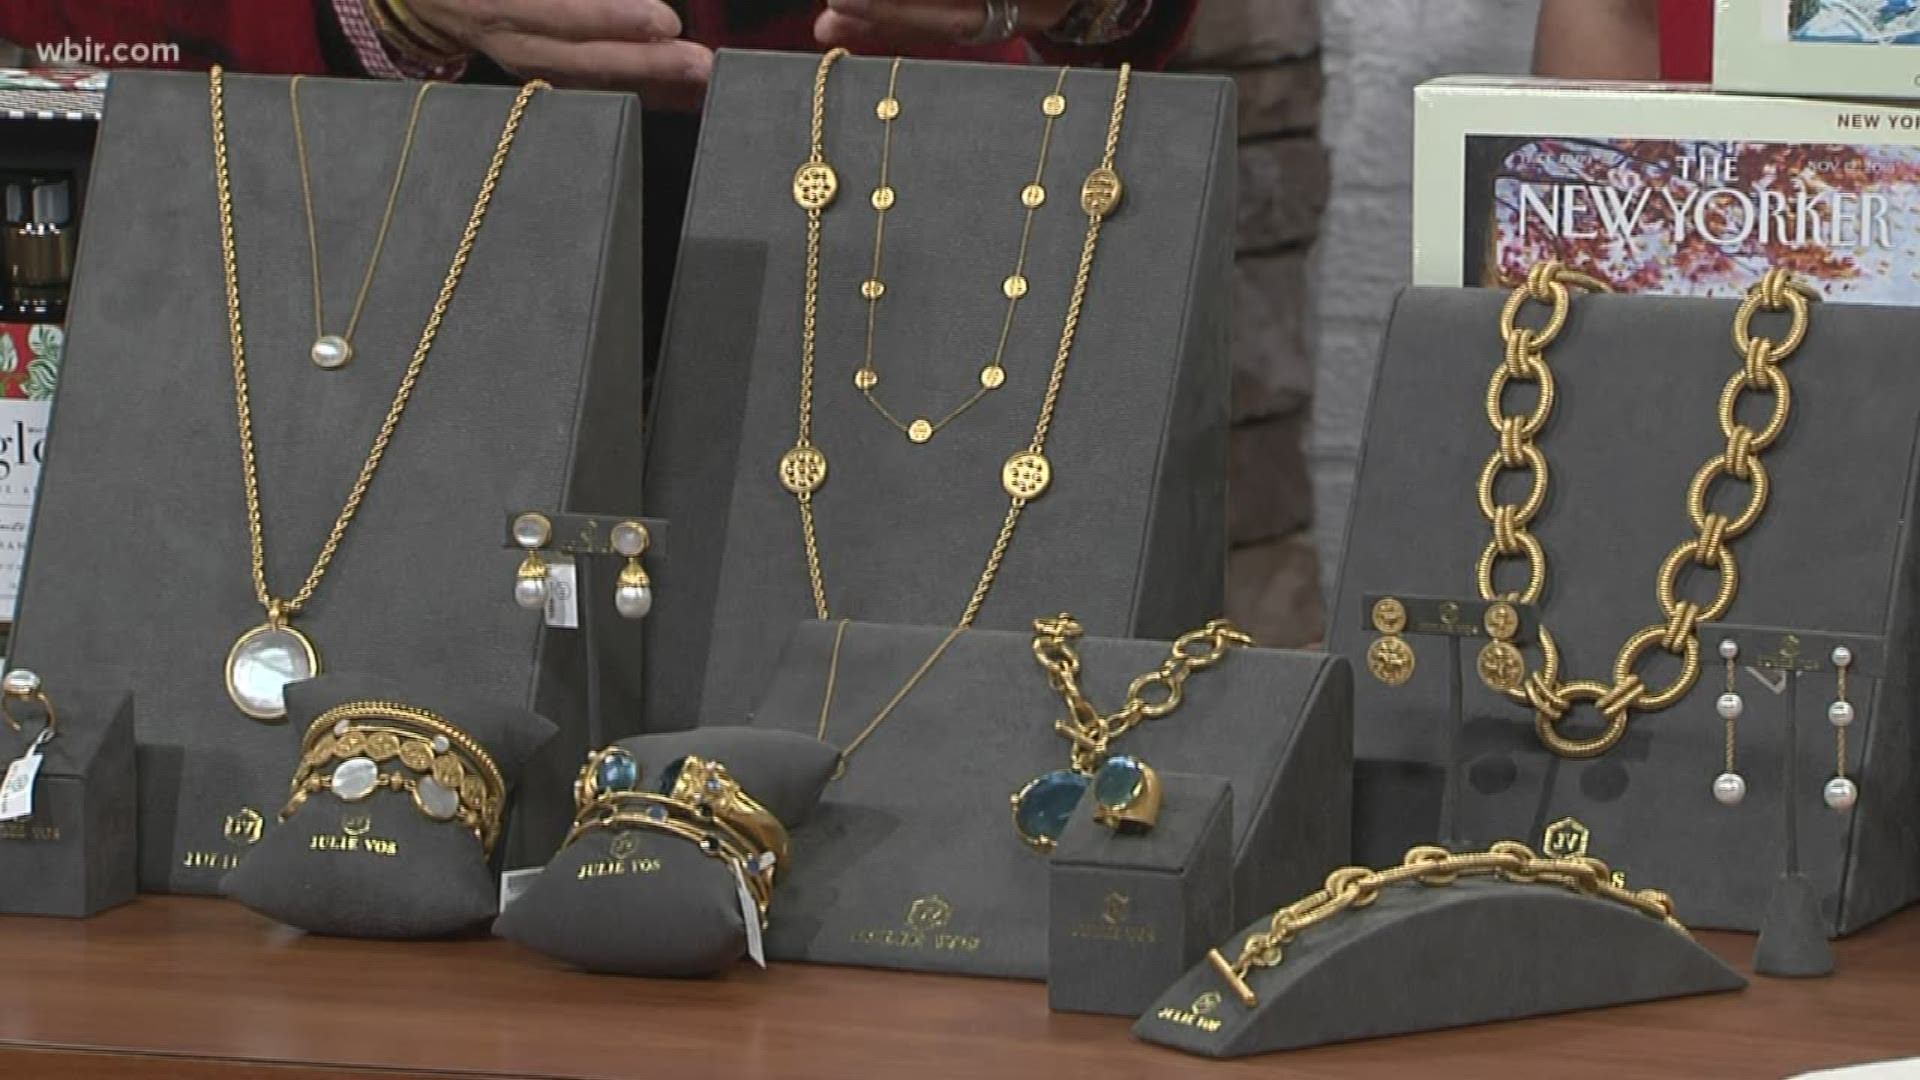 Interior designer Todd Richesin talks about a collectible type of jewelry that could be what you need for a holiday gift.